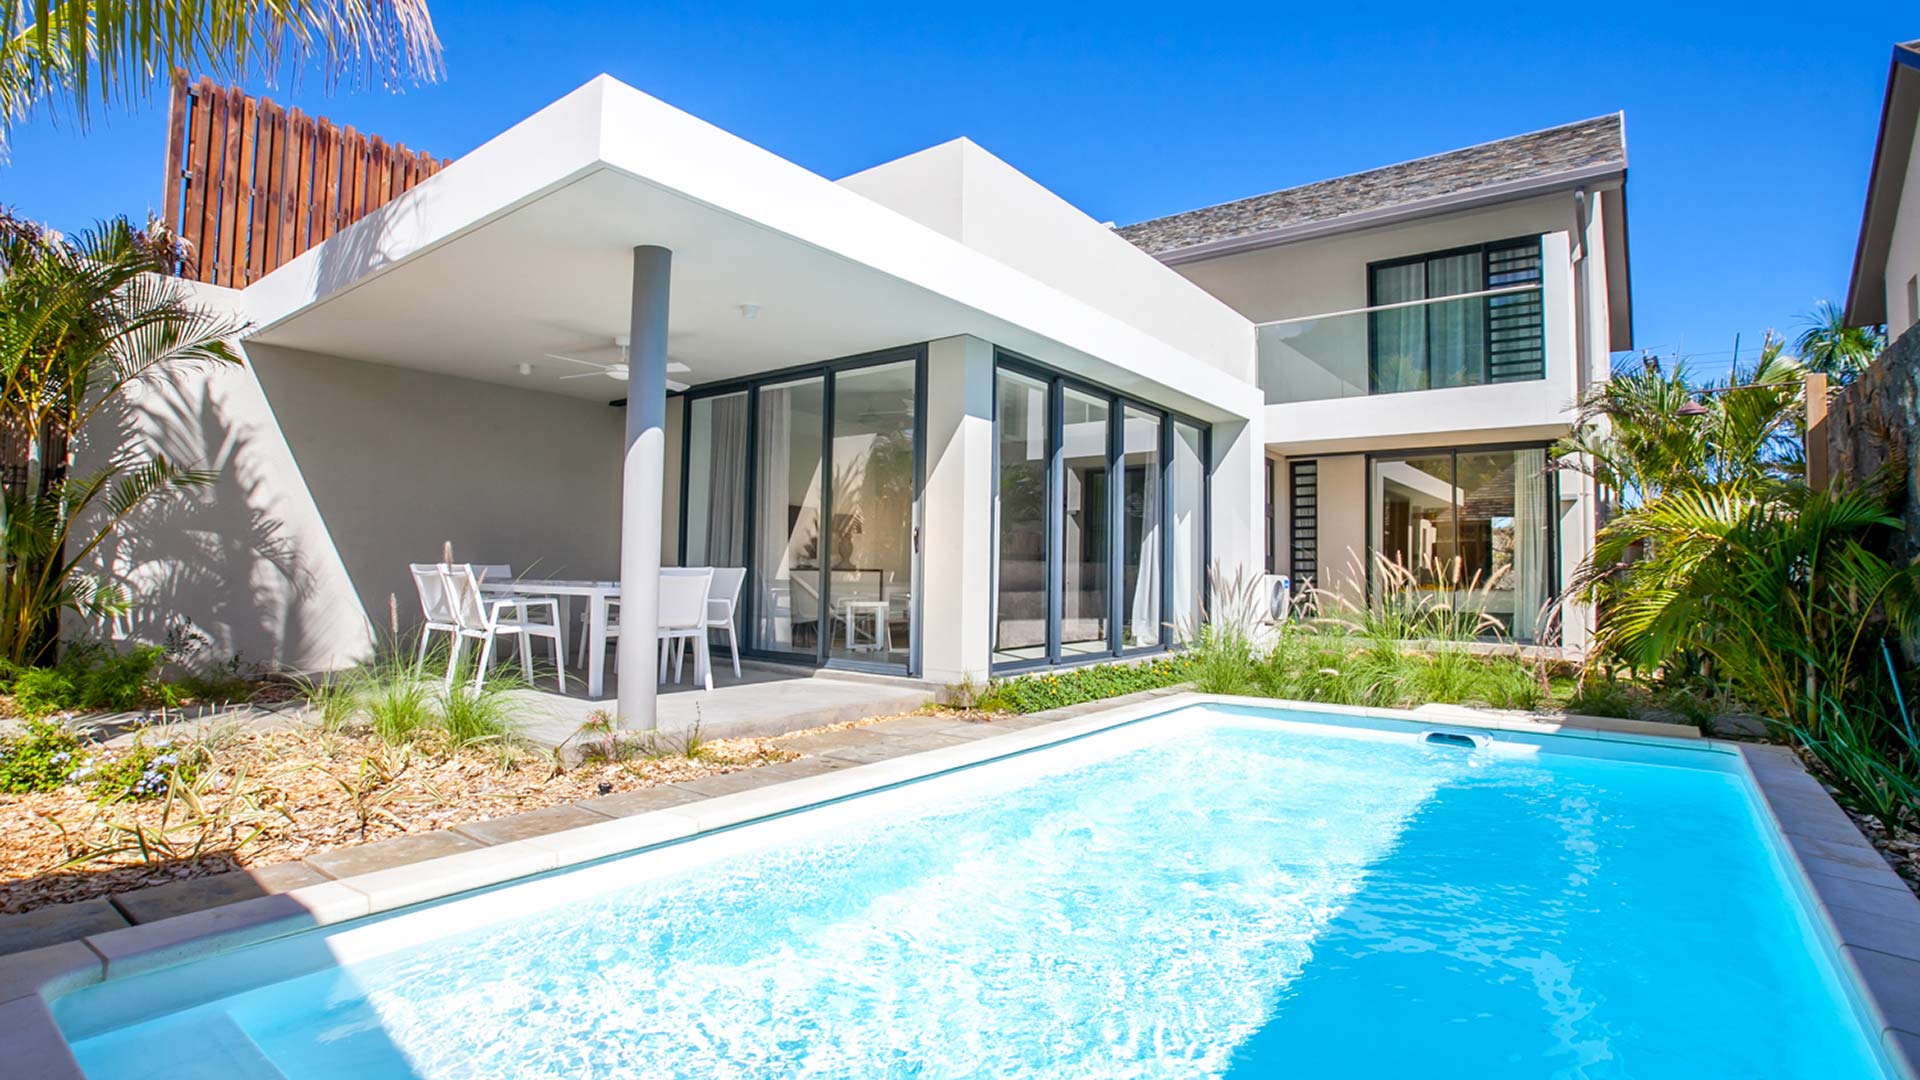 Maximize Your Luxuries By Getting A Villa For Sale In Mauritius